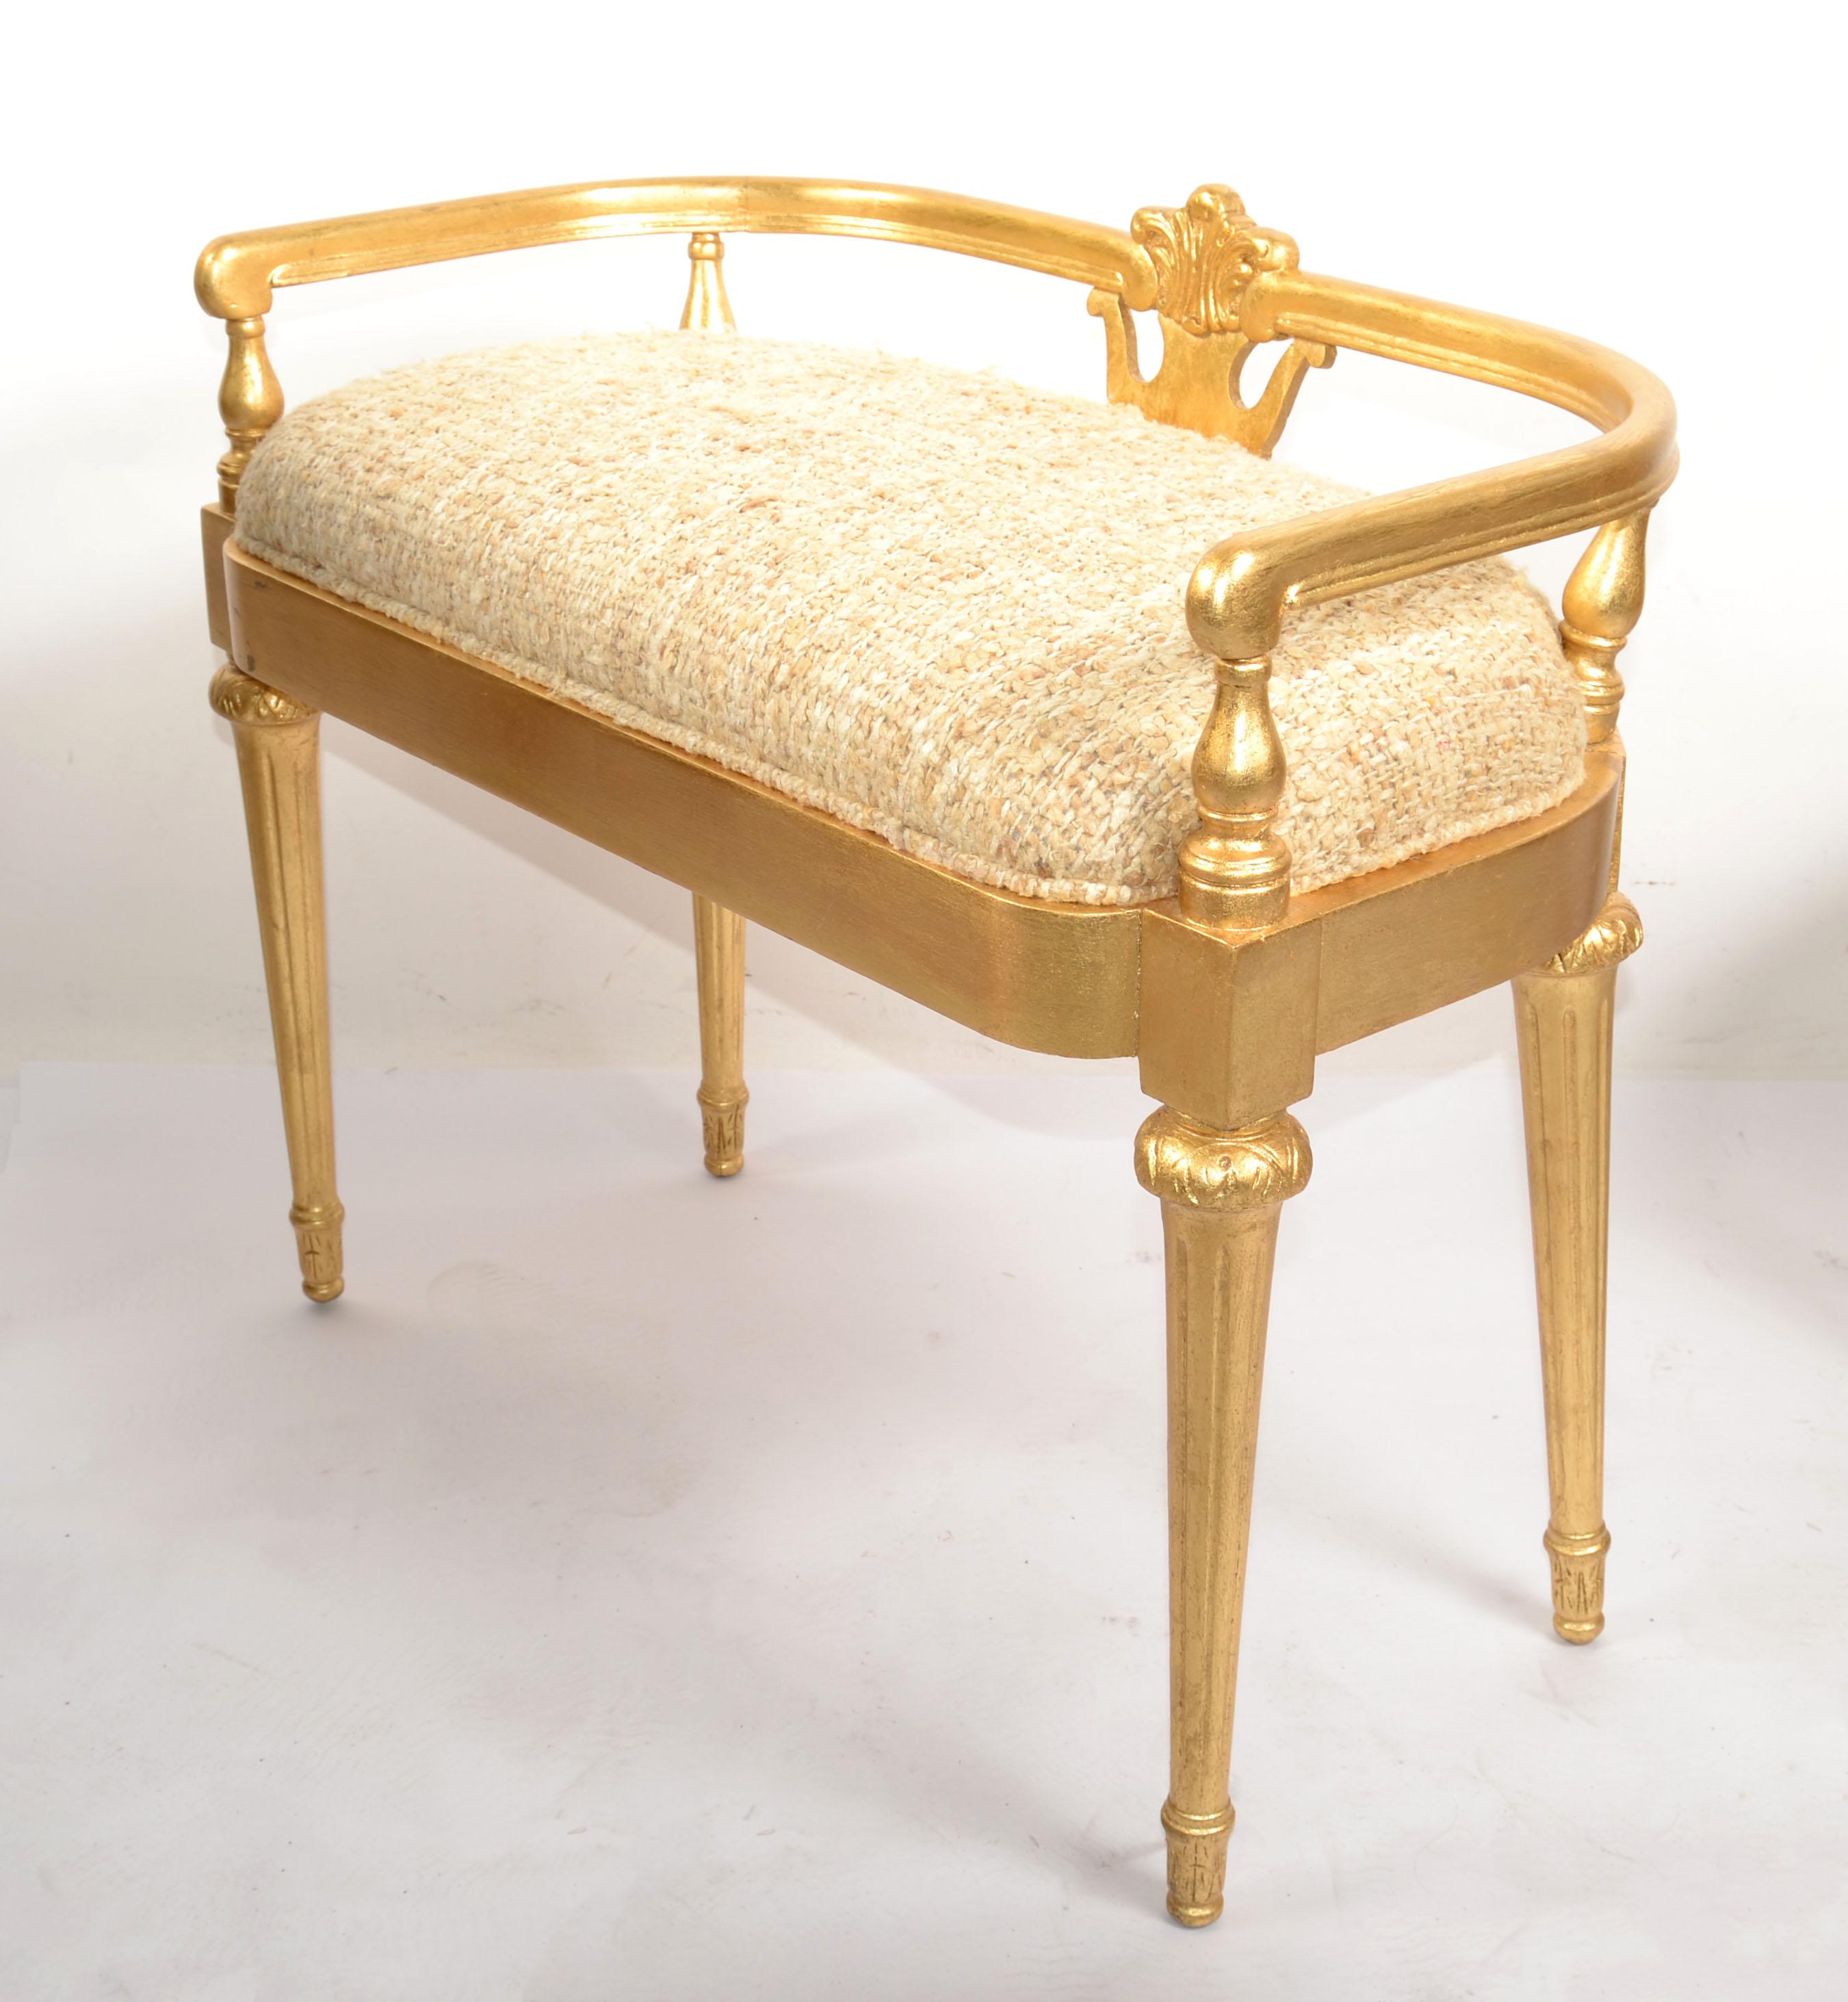 1950s French Louis XIV Style Hand Carved Giltwood Bench Wool Fabric Upholstery For Sale 1